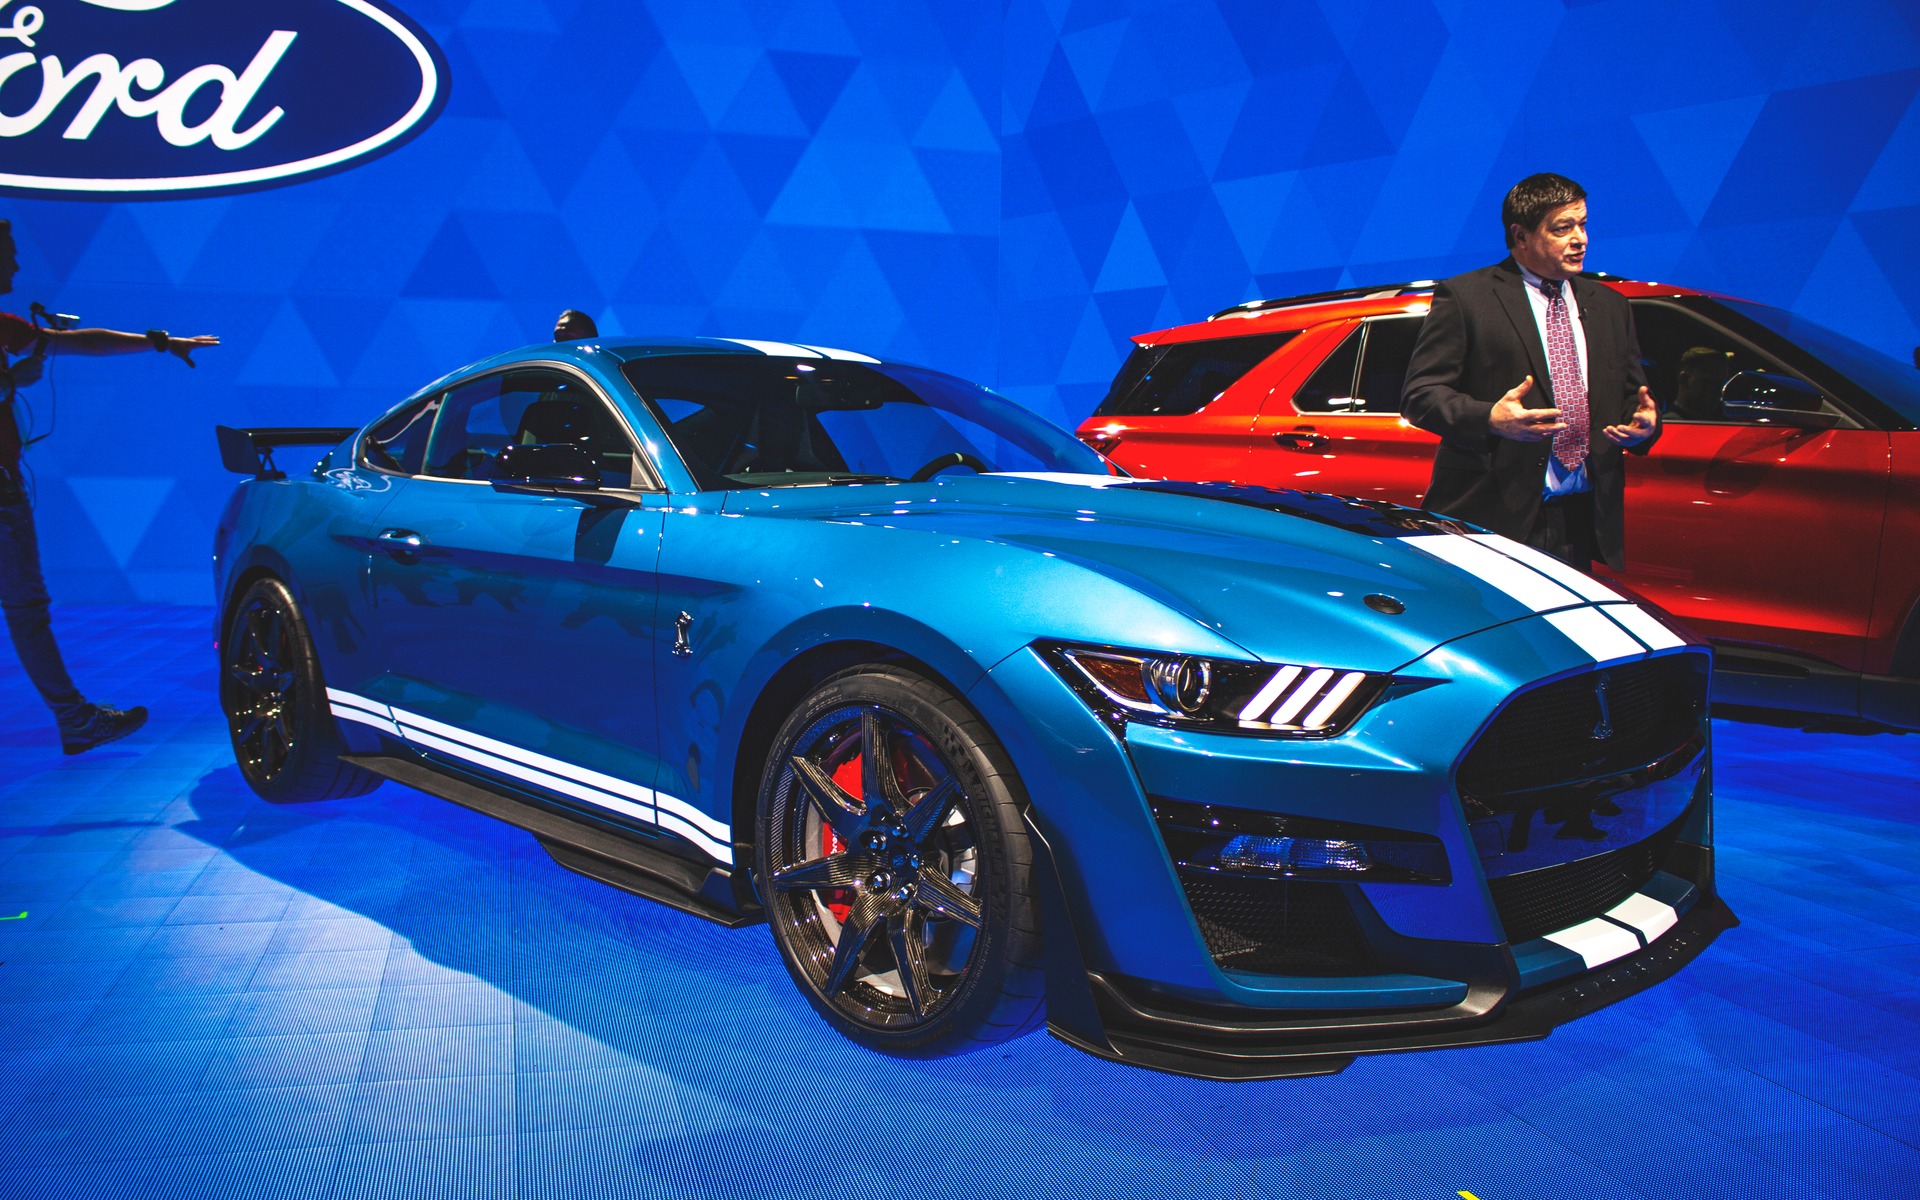 2020 Shelby Gt500 Ford Presents Its Most Powerful Mustang Ever Images, Photos, Reviews